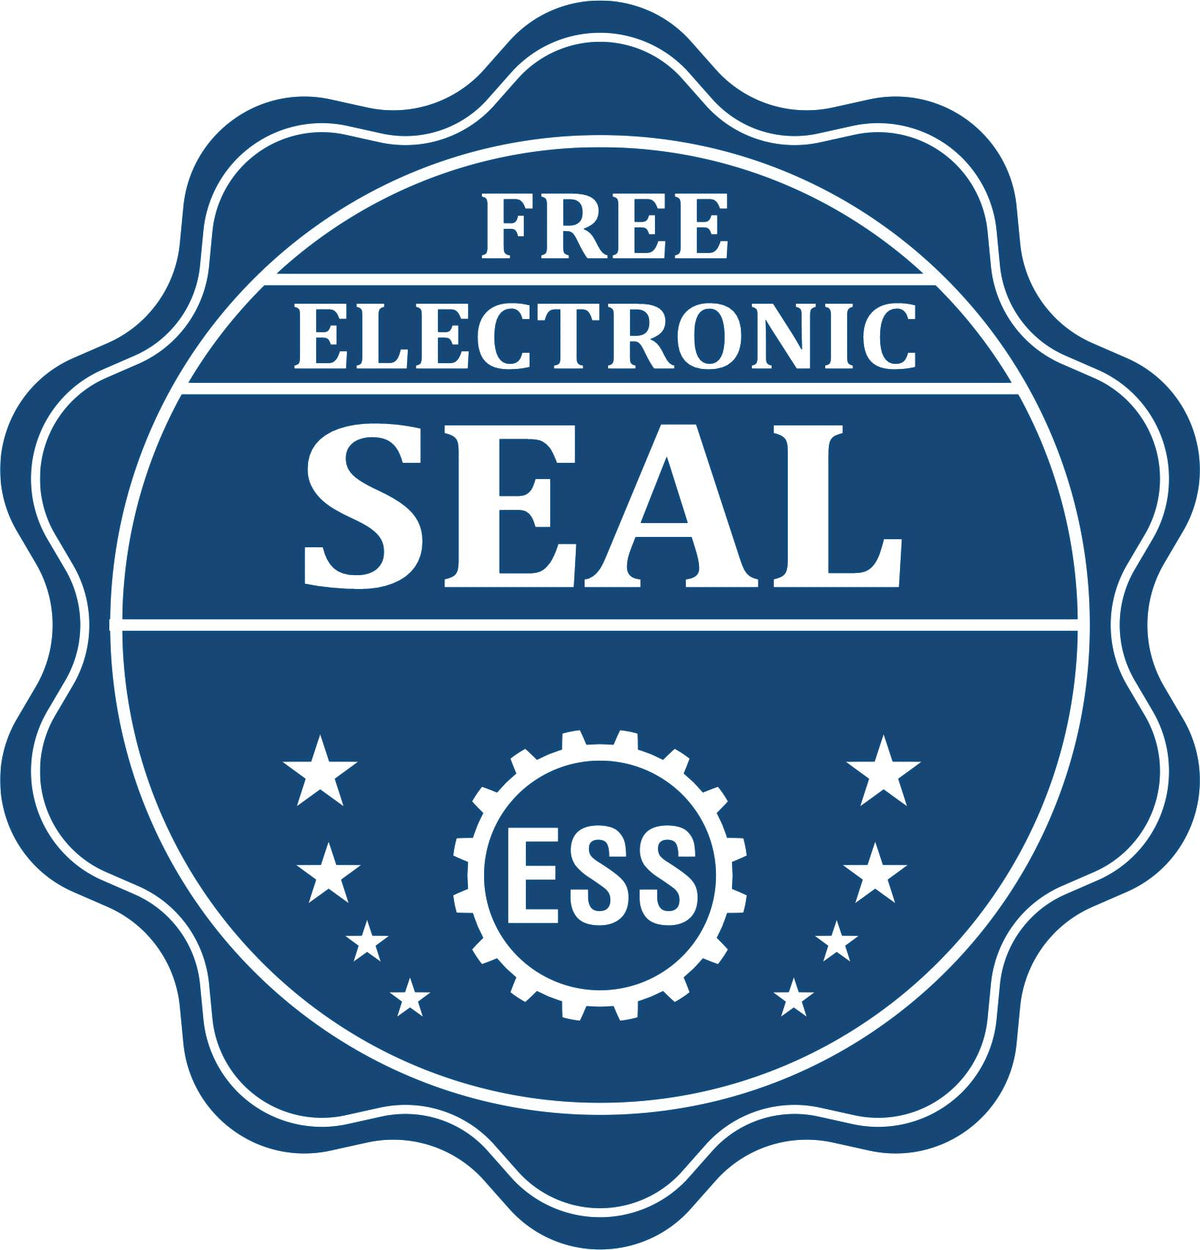 A badge showing a free electronic seal for the Extended Long Reach Connecticut Surveyor Embosser with stars and the ESS gear on the emblem.